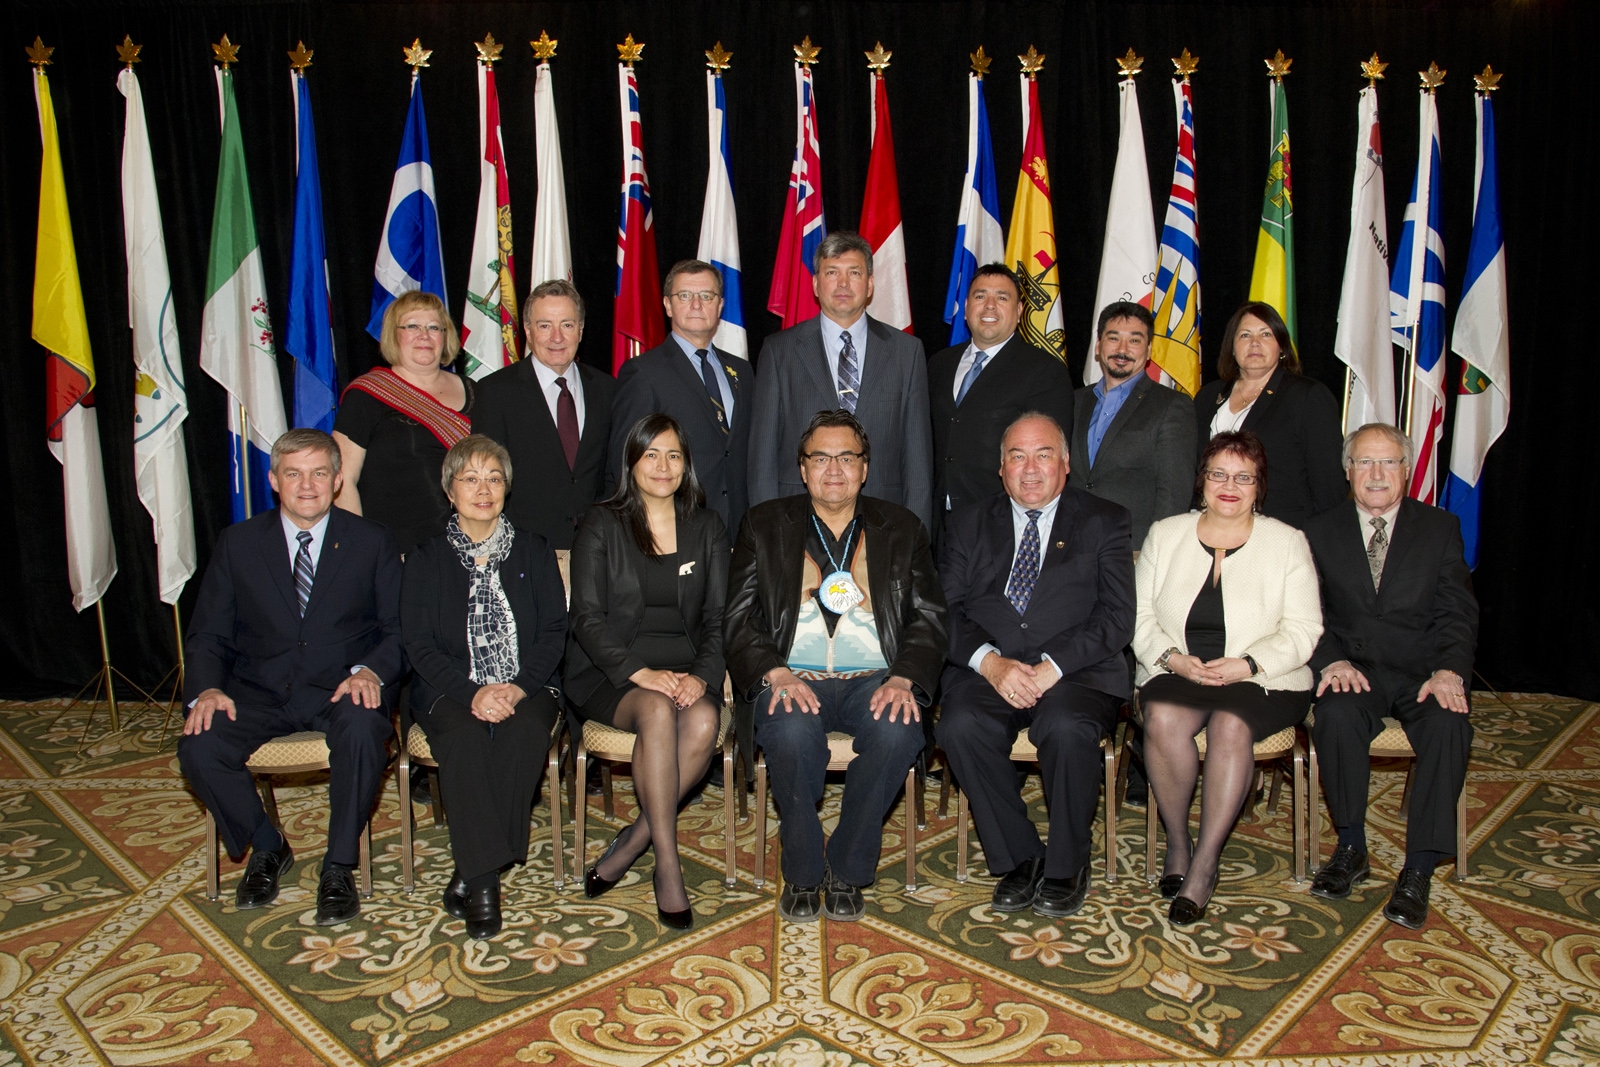 Official Photo - Meeting of Provincial-Territorial Ministers responsible for Aboriginal Affairs and Leaders of the National Aboriginal Organizations